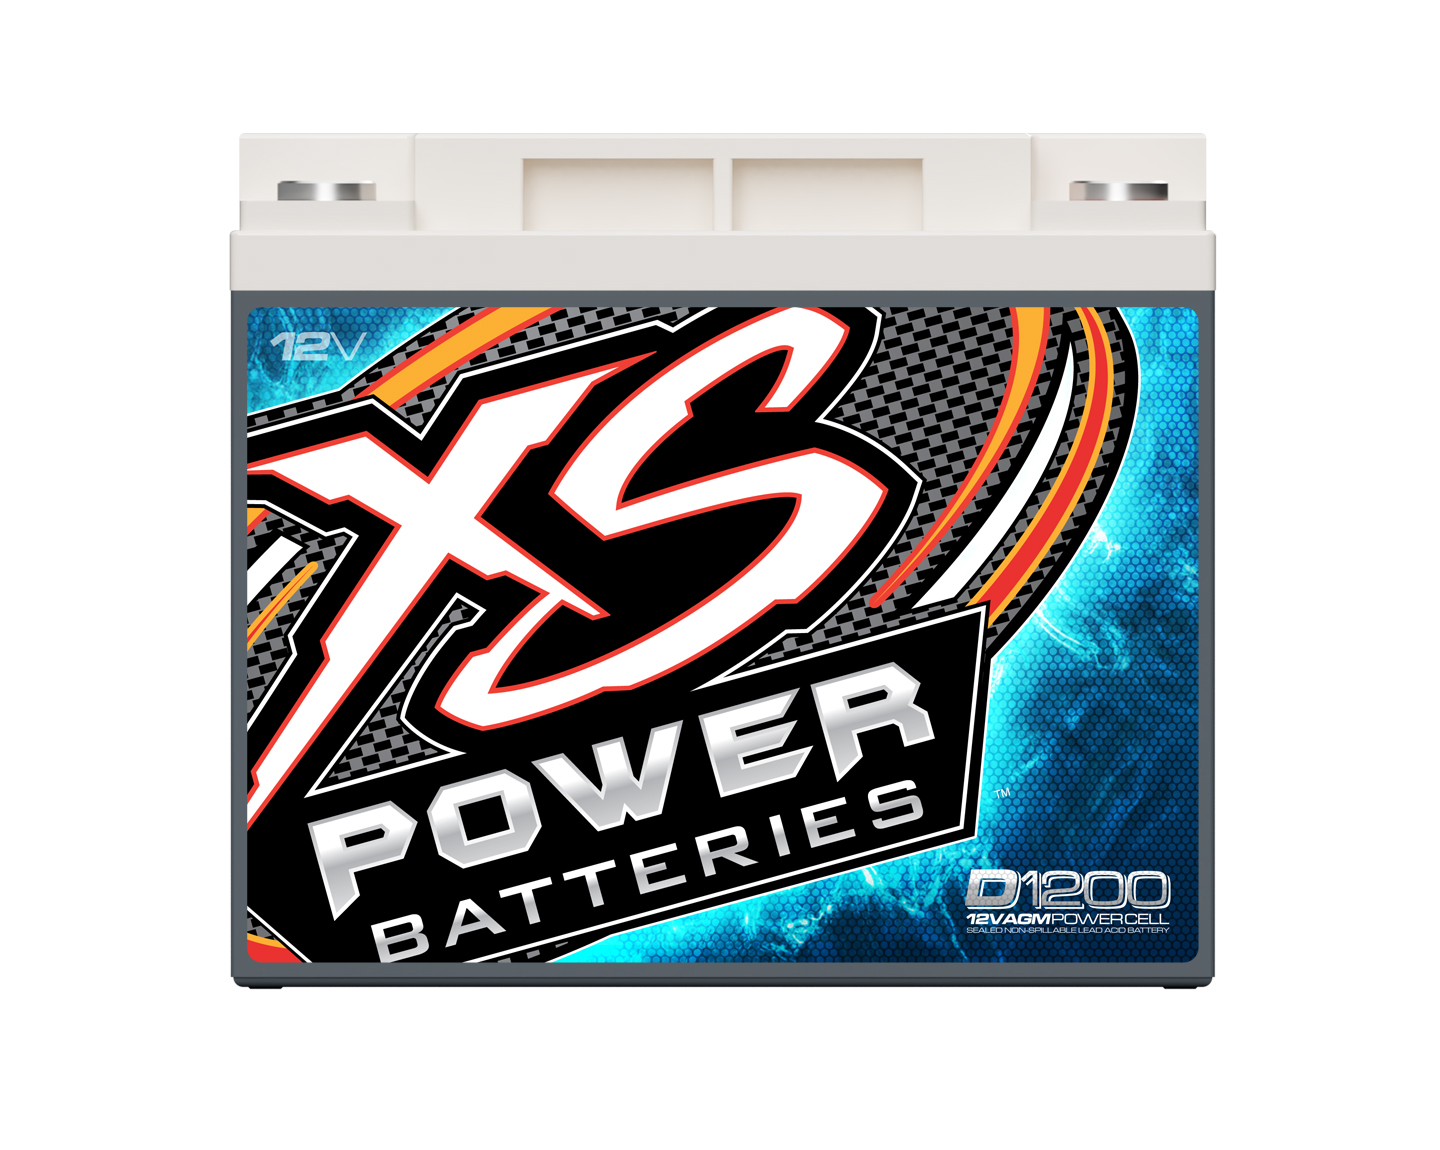 Can I use this battery for my replacement under the hood?